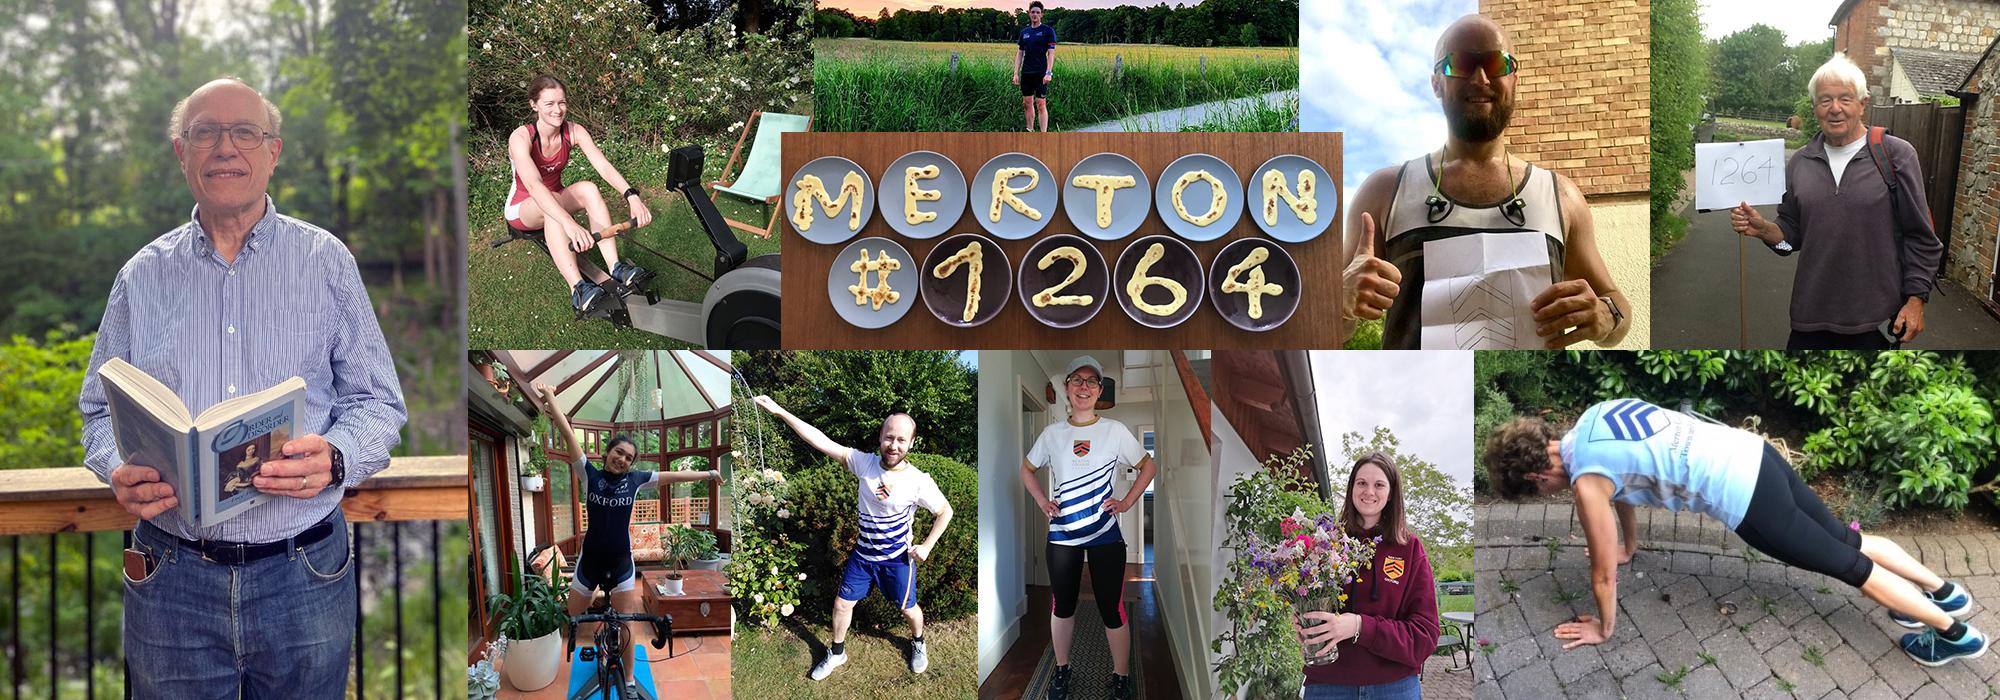 A montage of photographs showing participants in The Big Merton 1264 Challenge